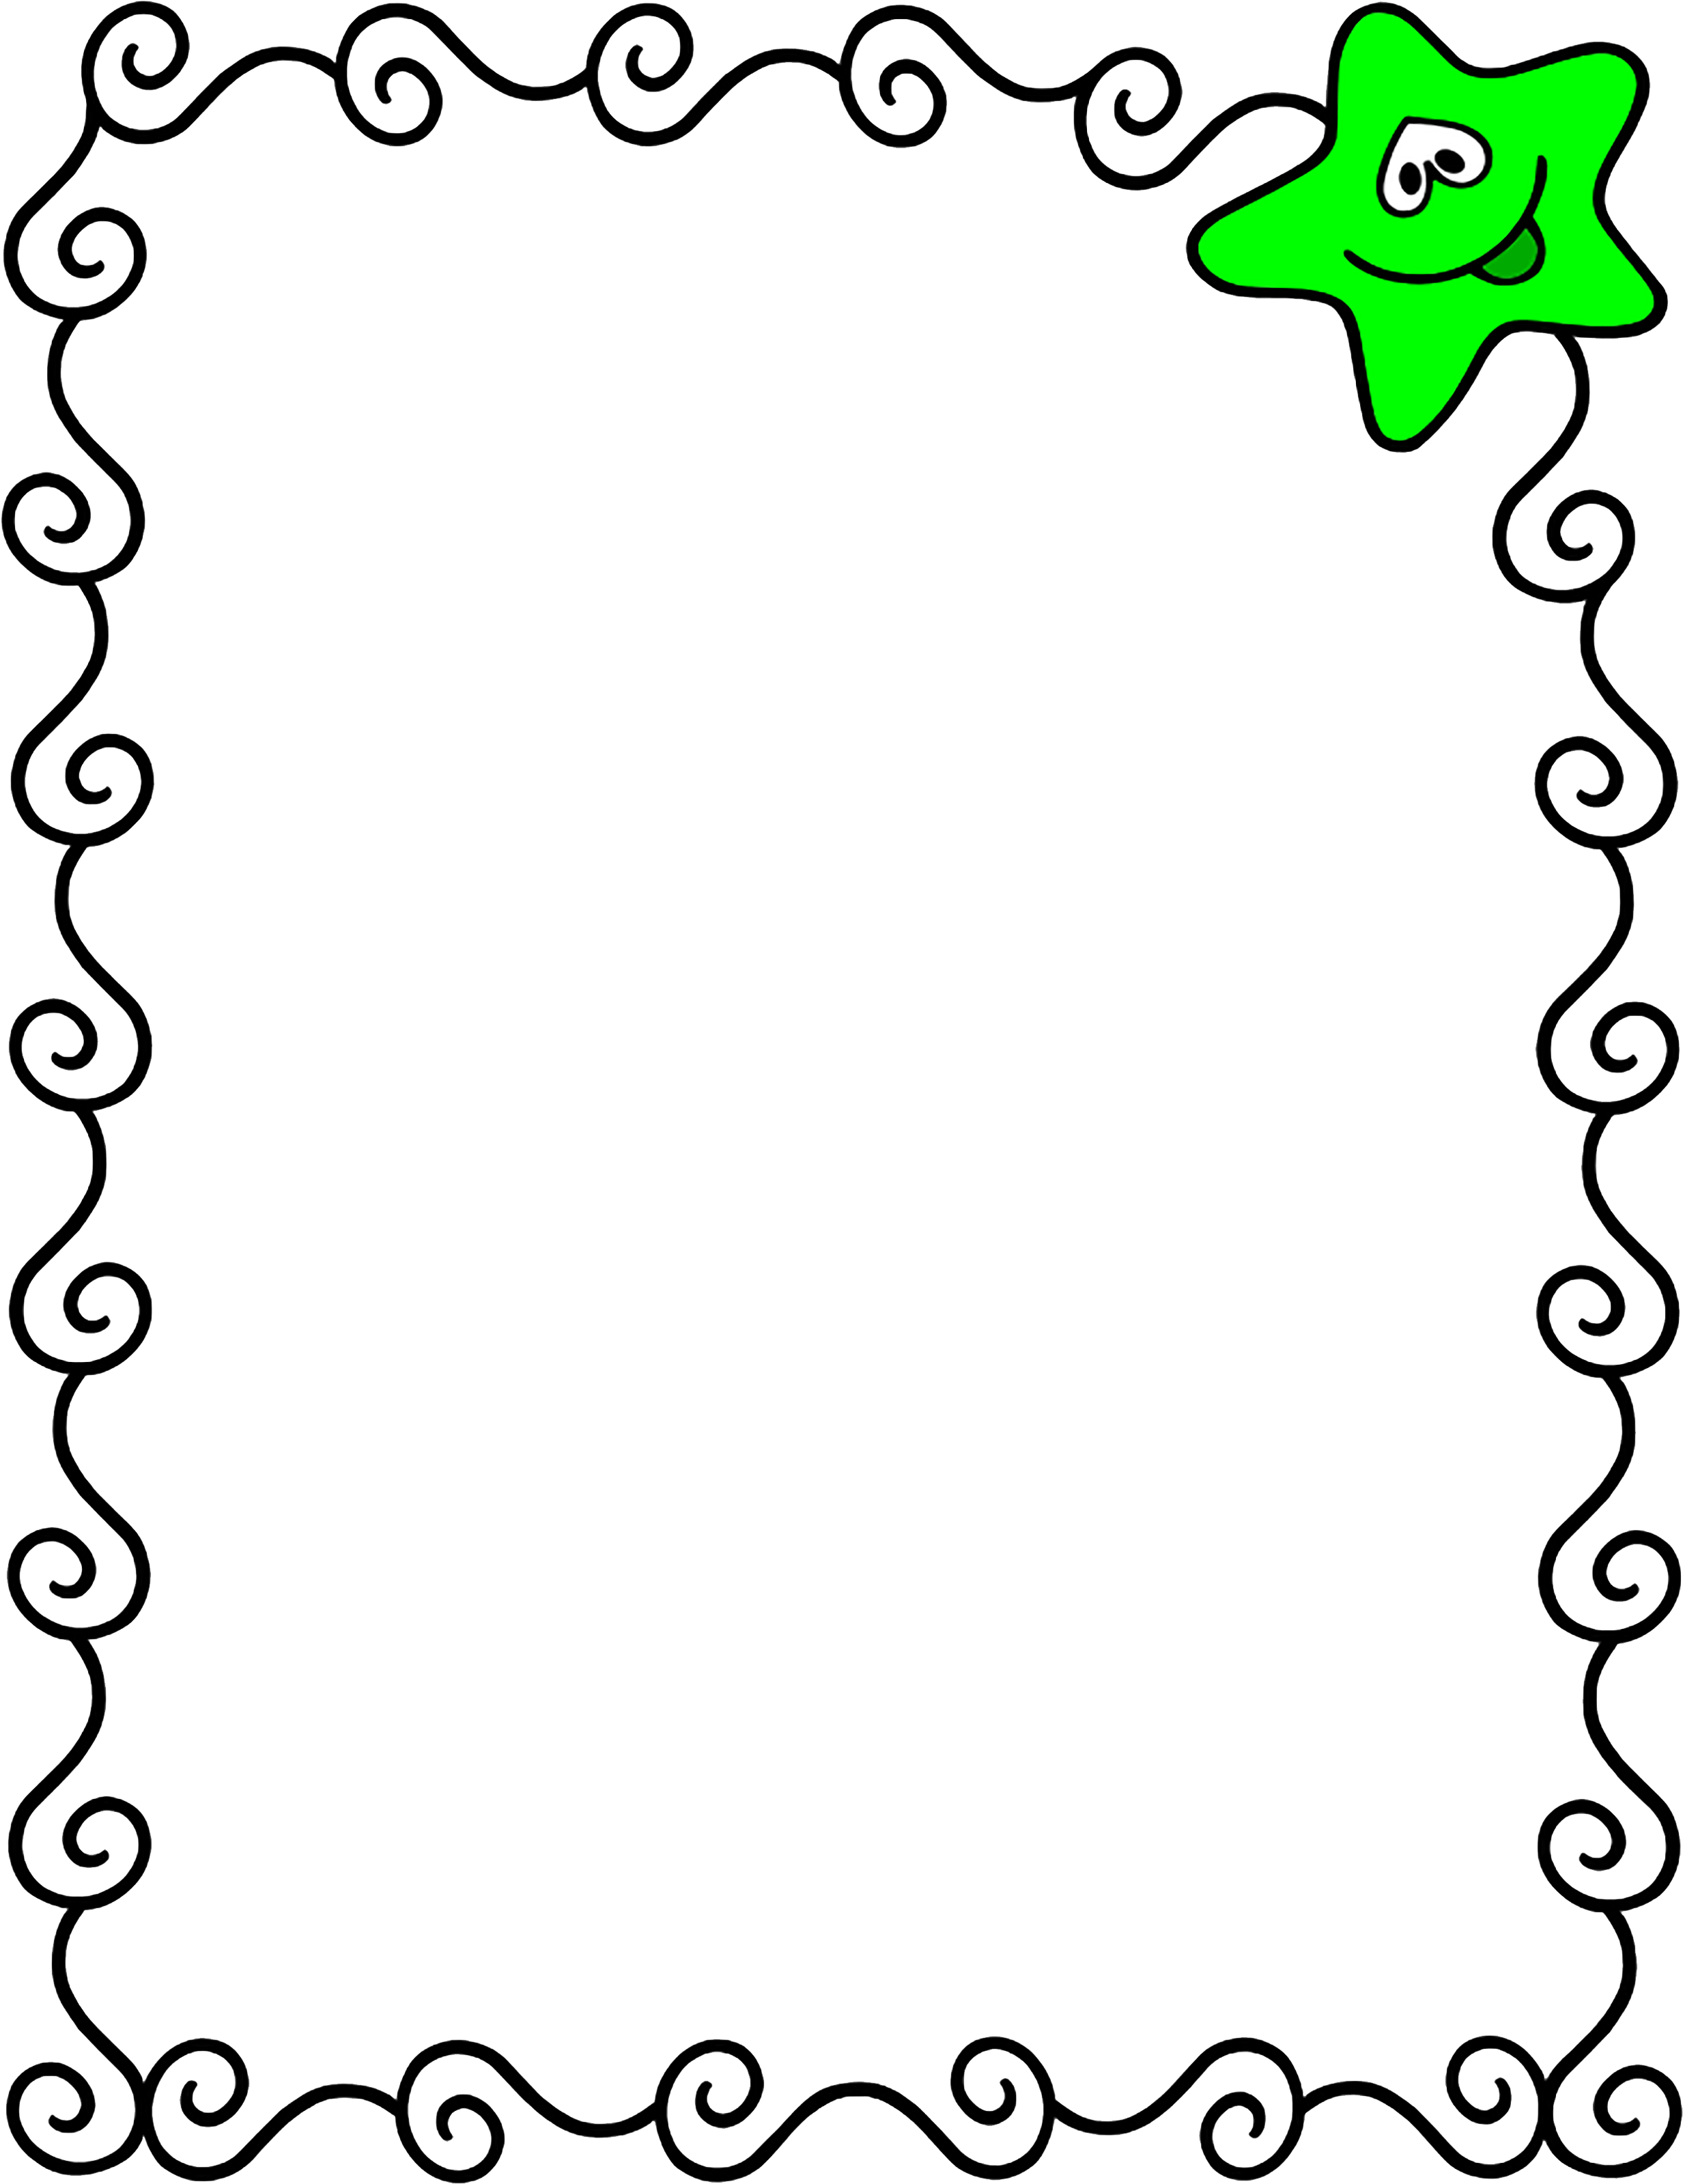 *✿**✿*frame*✿**✿* - Borders And Frames For Kids Clipart (2550x3300)